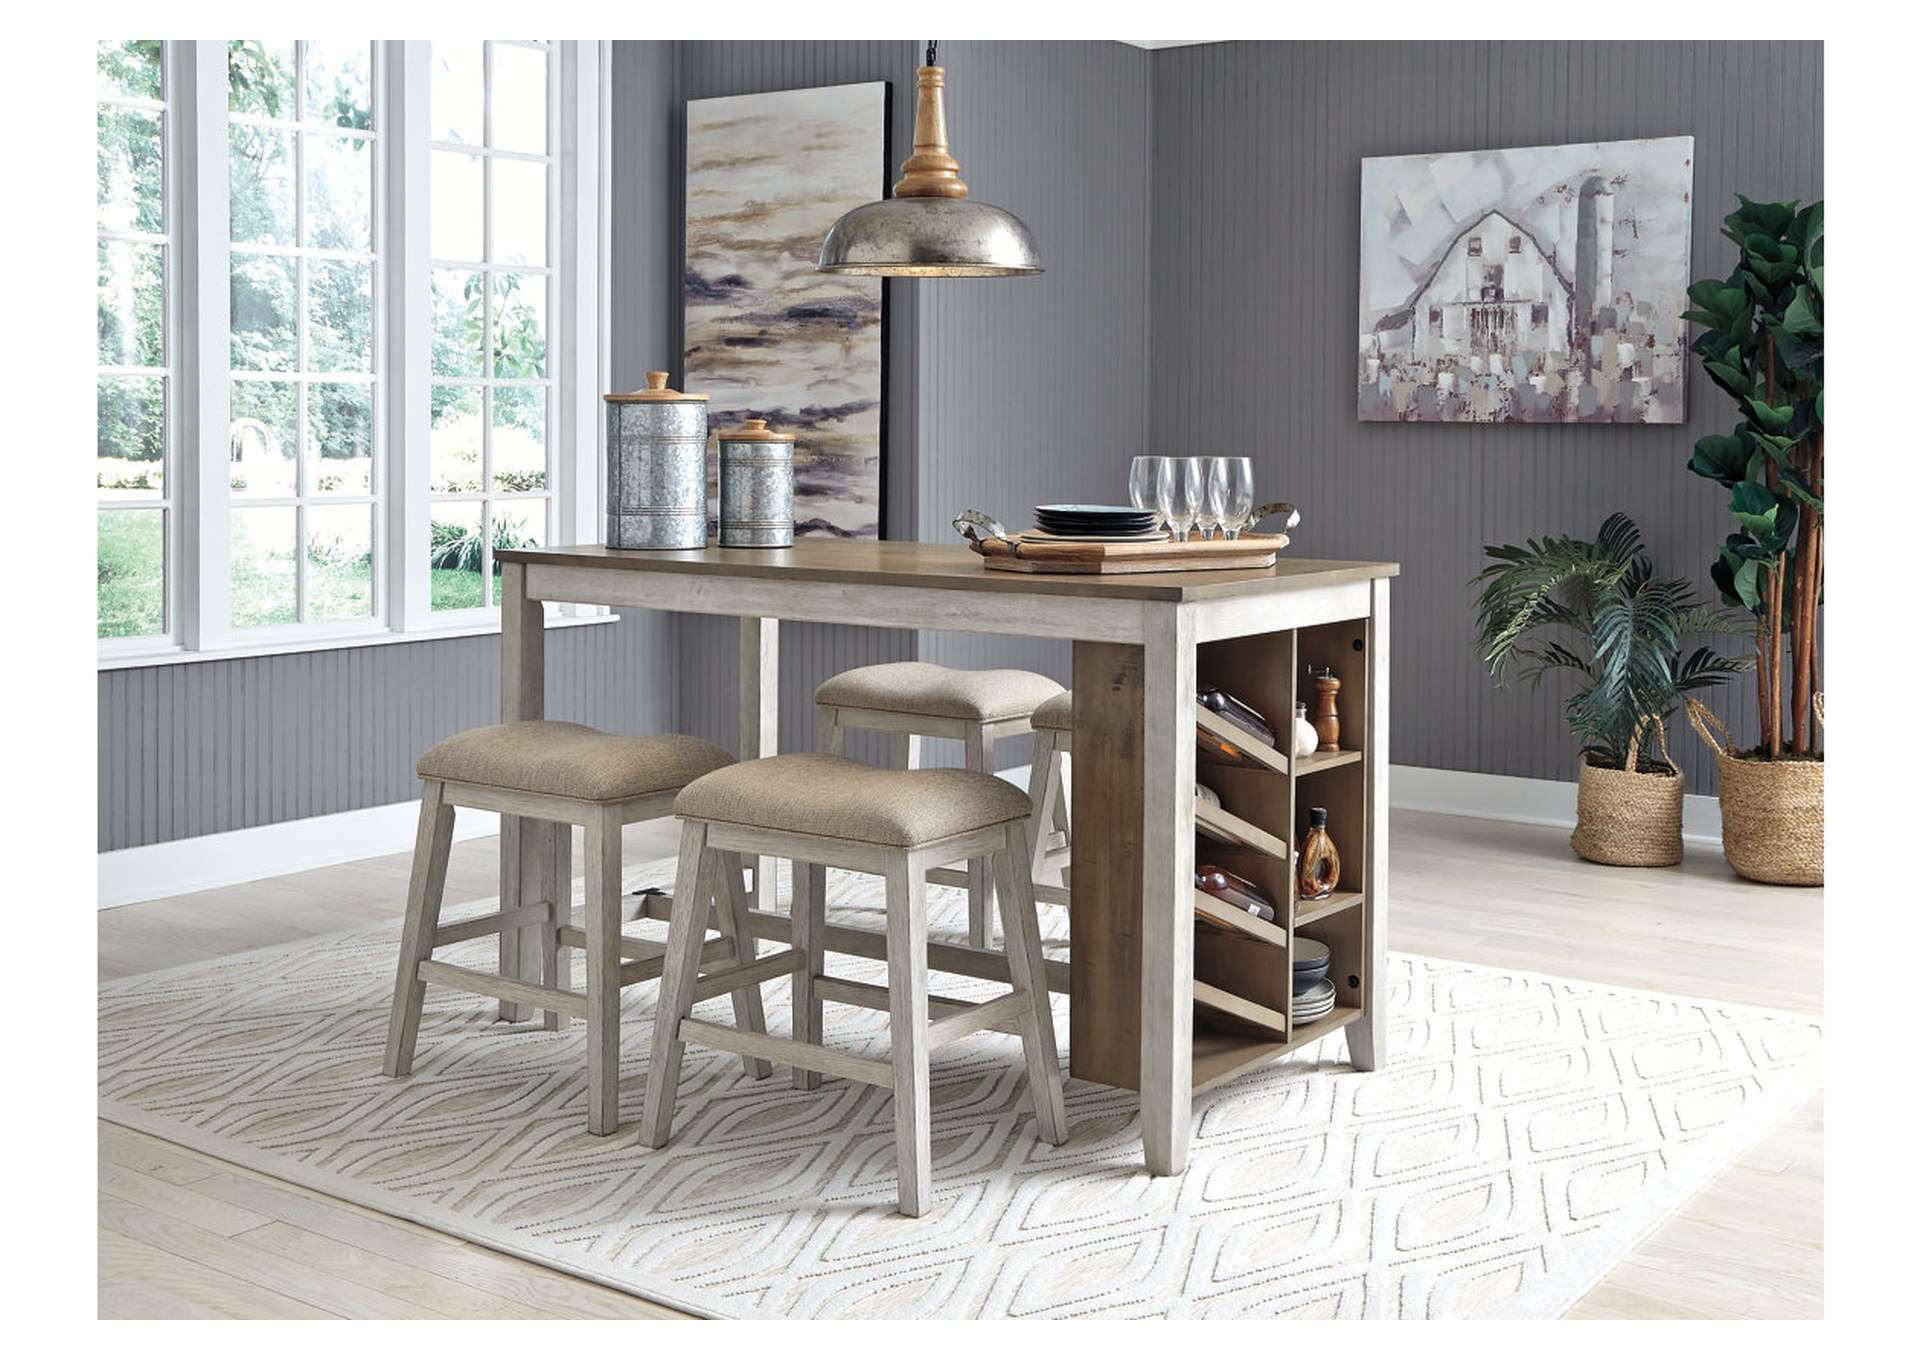 Skempton Counter Height Dining Table and 4 Barstools,Signature Design By Ashley